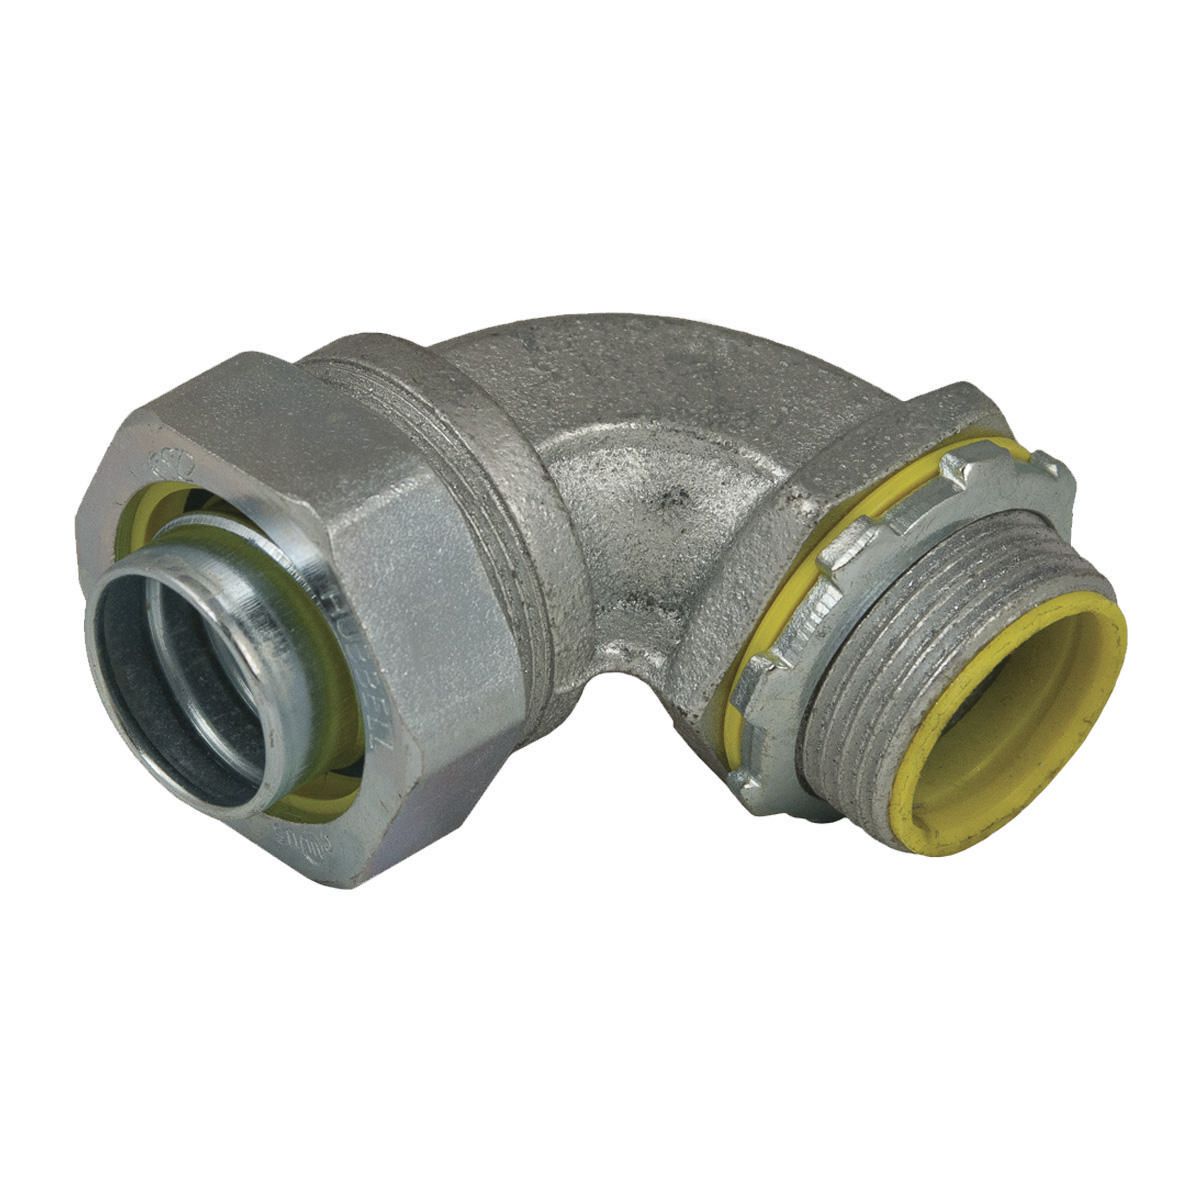 3544-8 | Connector, Raco 90 1 in. Degree Liquidtight Insulated |